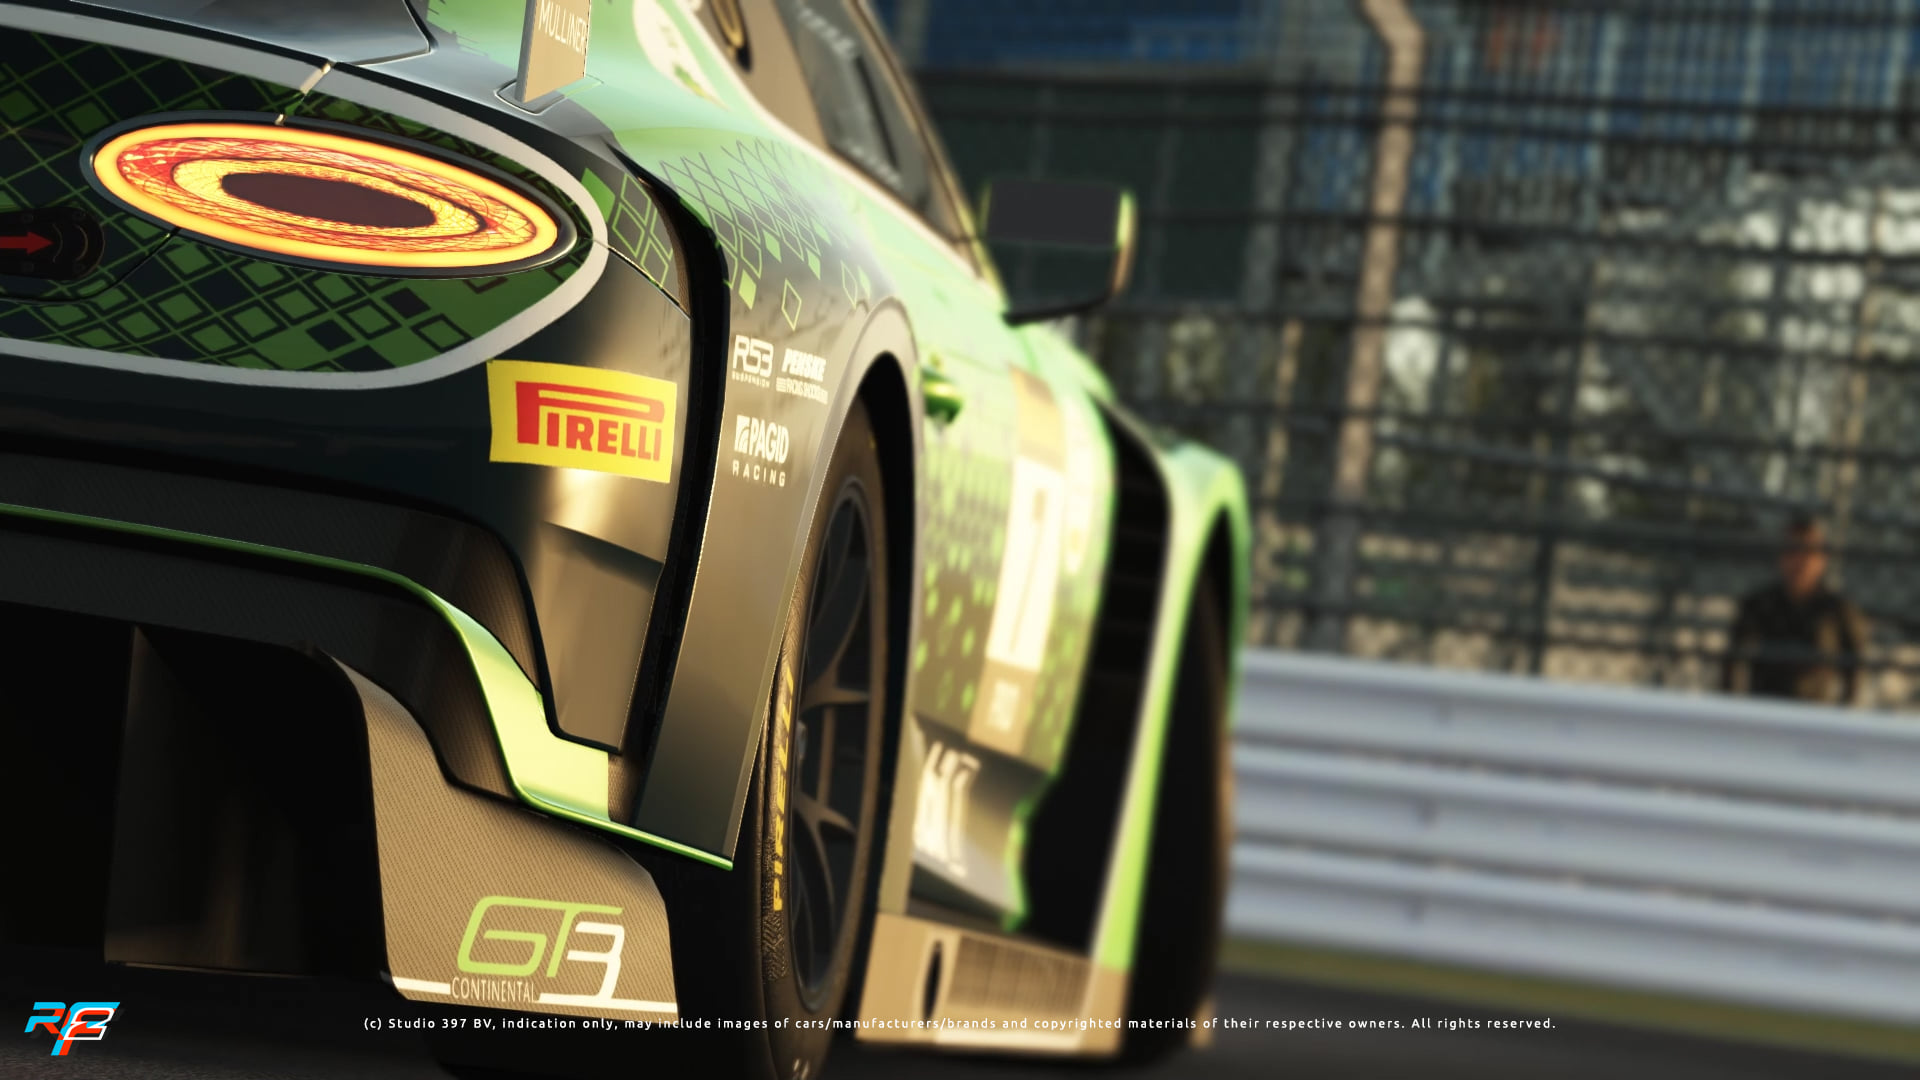 More information about "rFactor 2: in arrivo la Bentley Continental GT3, in un nuovo video"